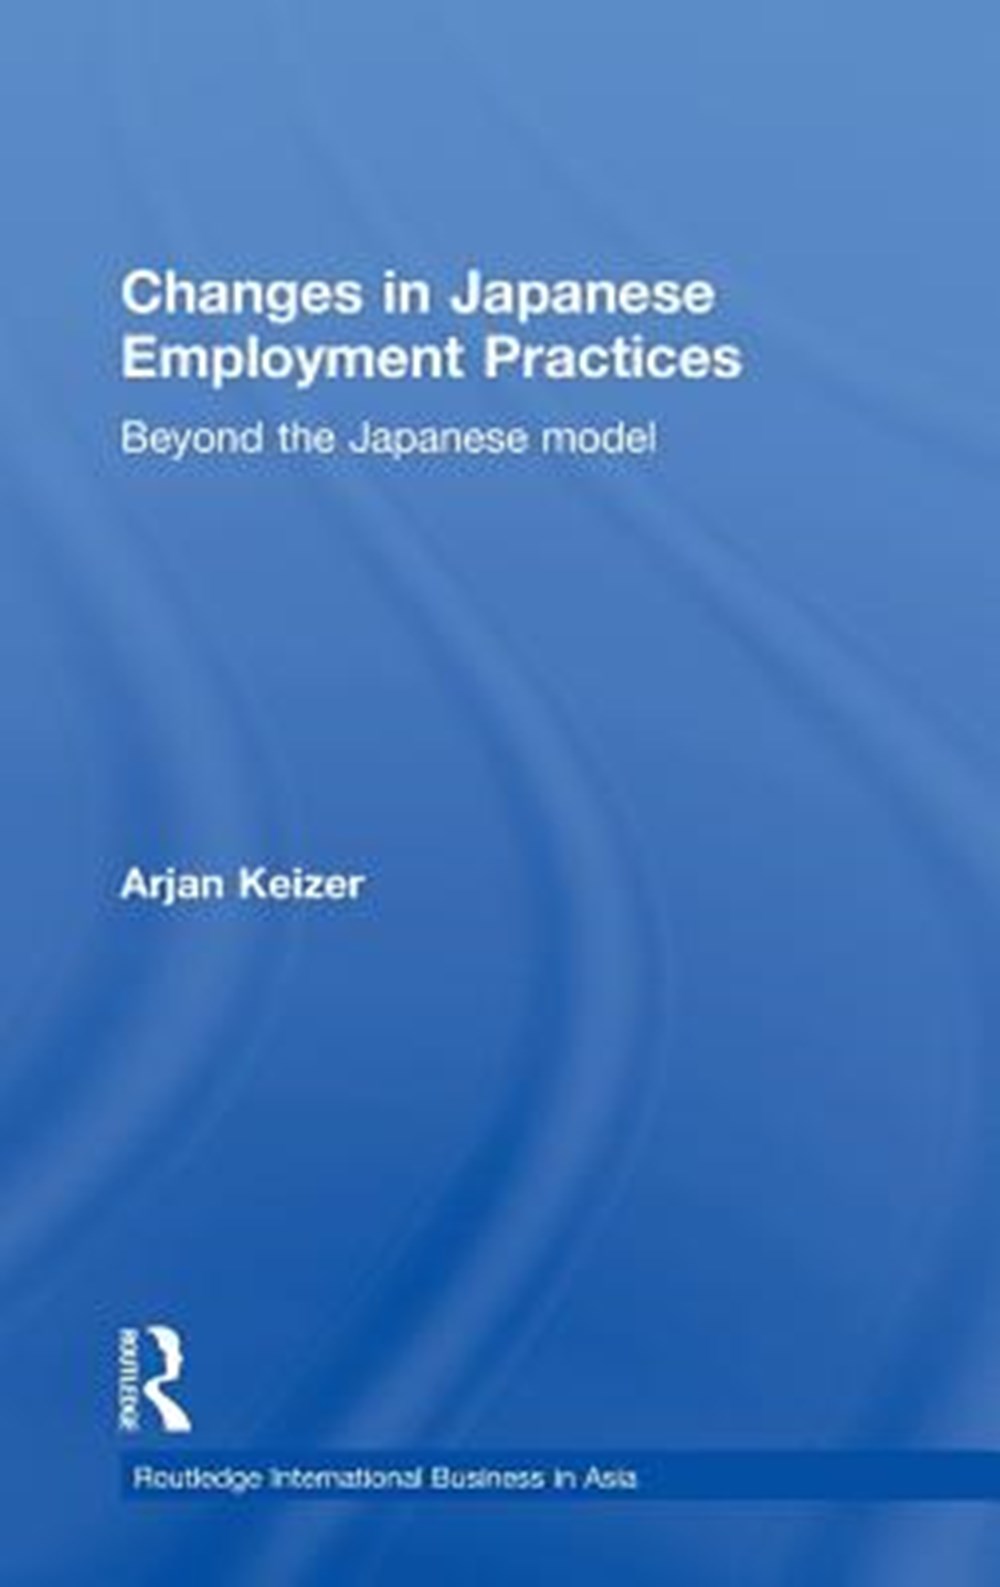 Changes in Japanese Employment Practices Beyond the Japanese Model